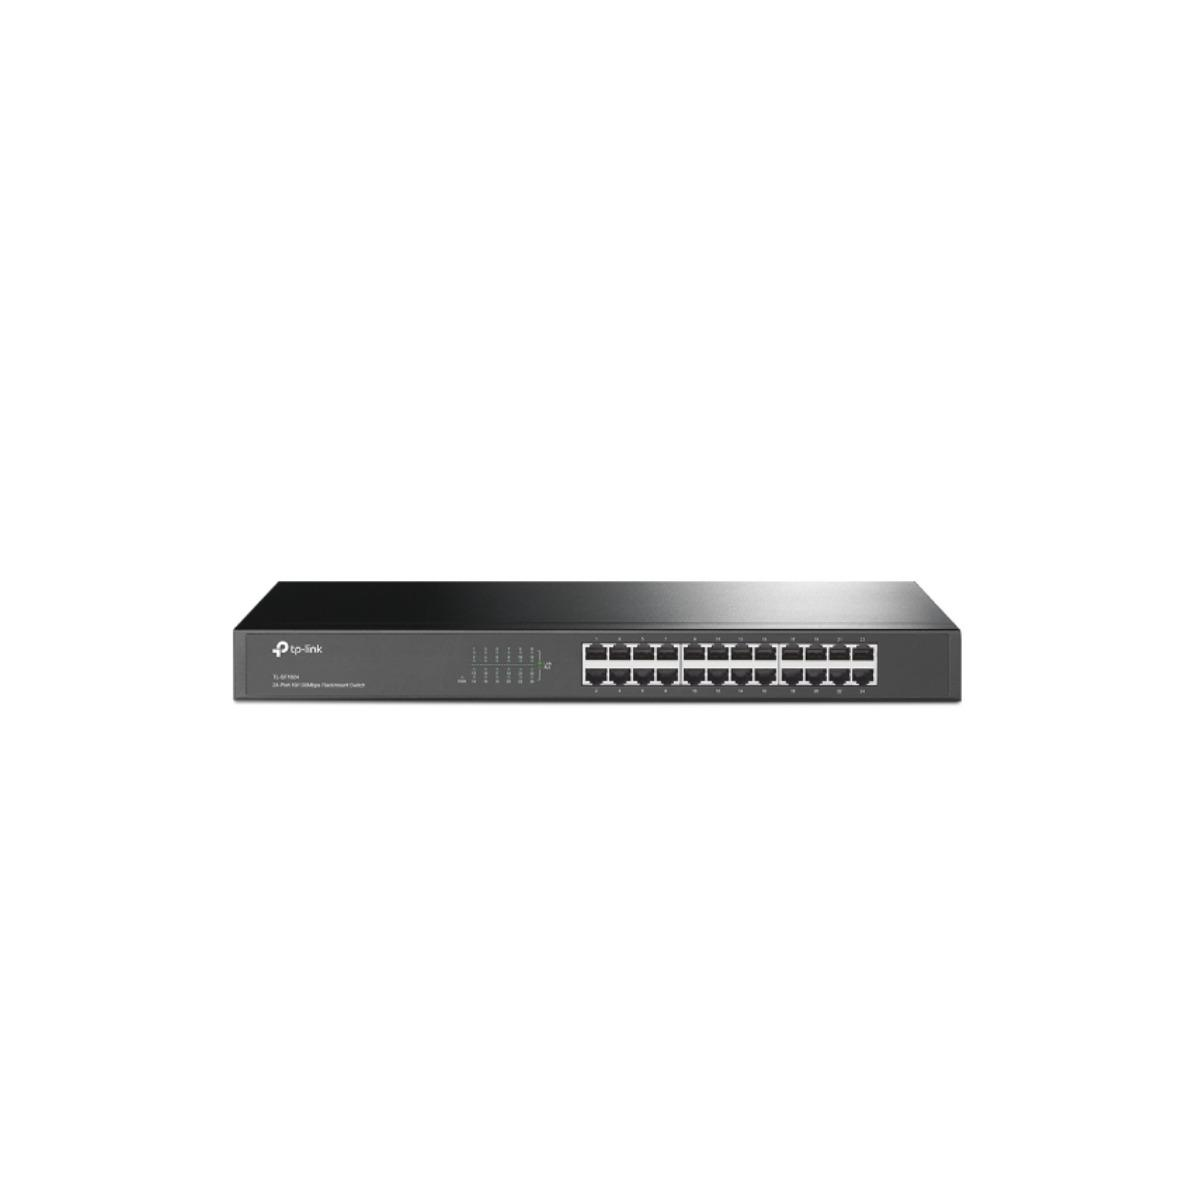 TP-Link Switch TL-SF1024 24-Port-10/100Mbit/s-Rackmount-Switch TP-LINK 24